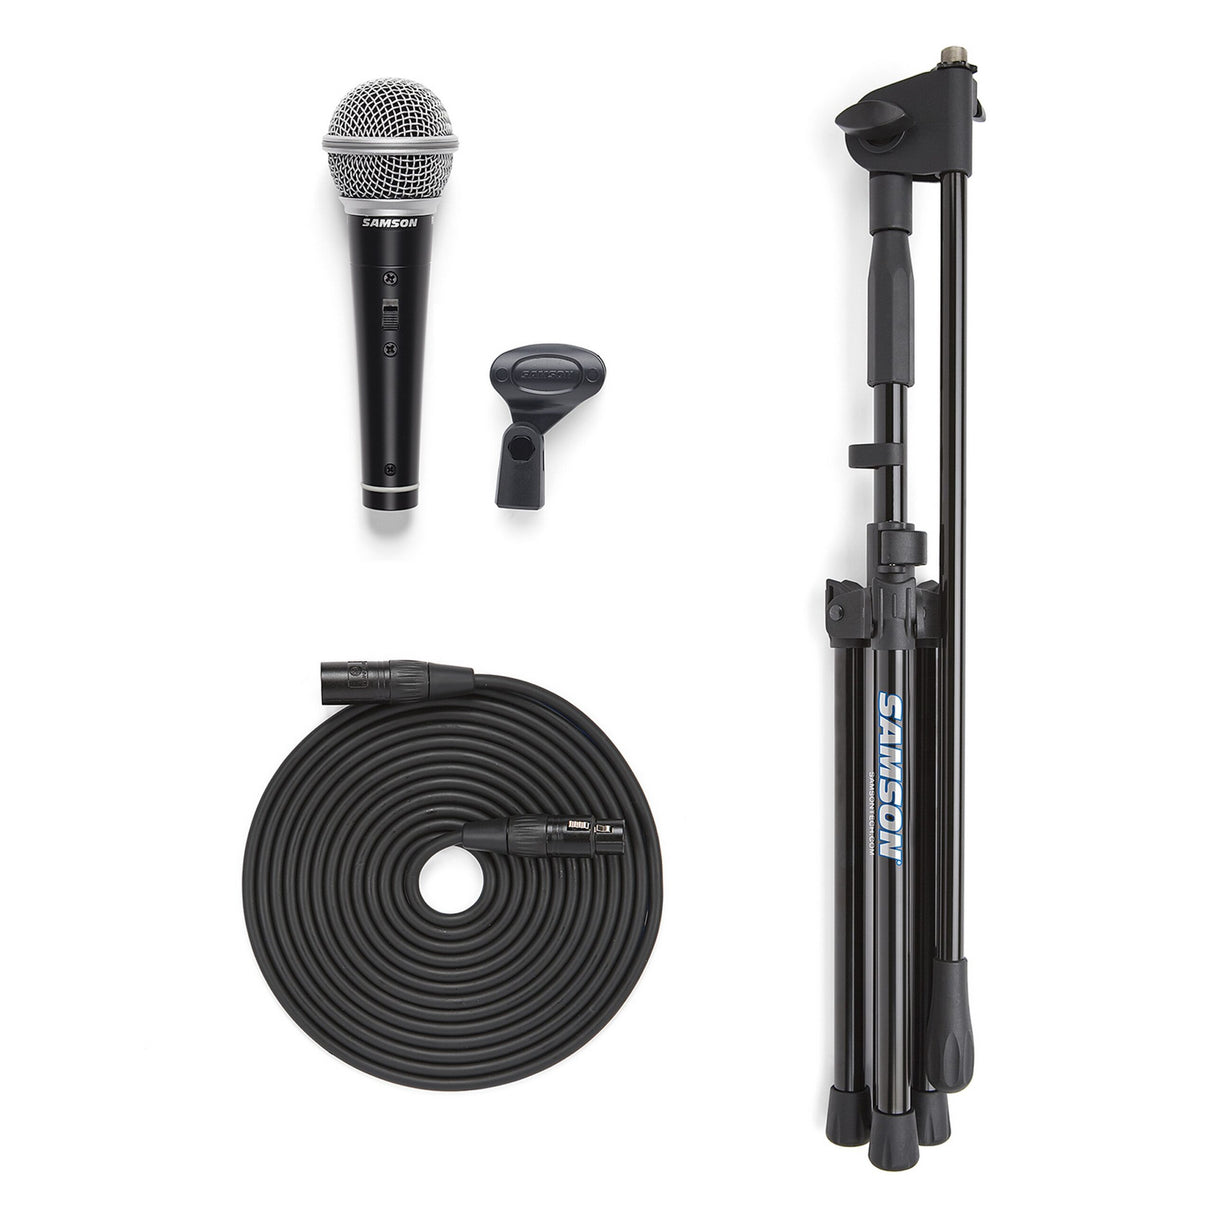 Samson VP10X Dynamic Microphone Value Pack with Tripod Boom Stand